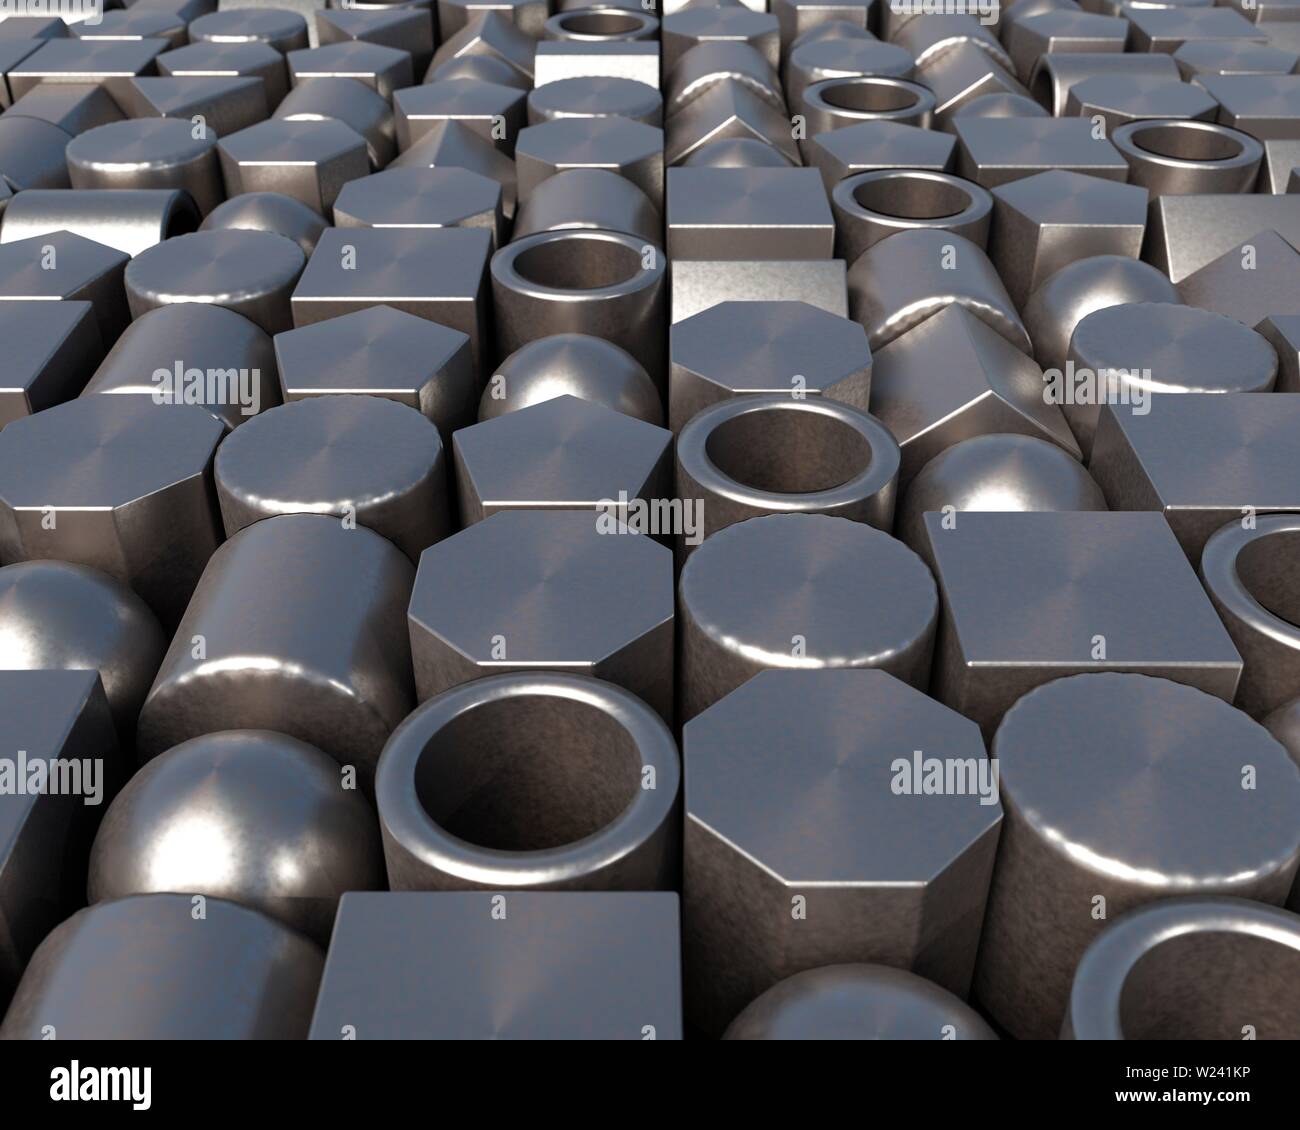 Large group of geometric objects made of metal, computer illustration. Stock Photo